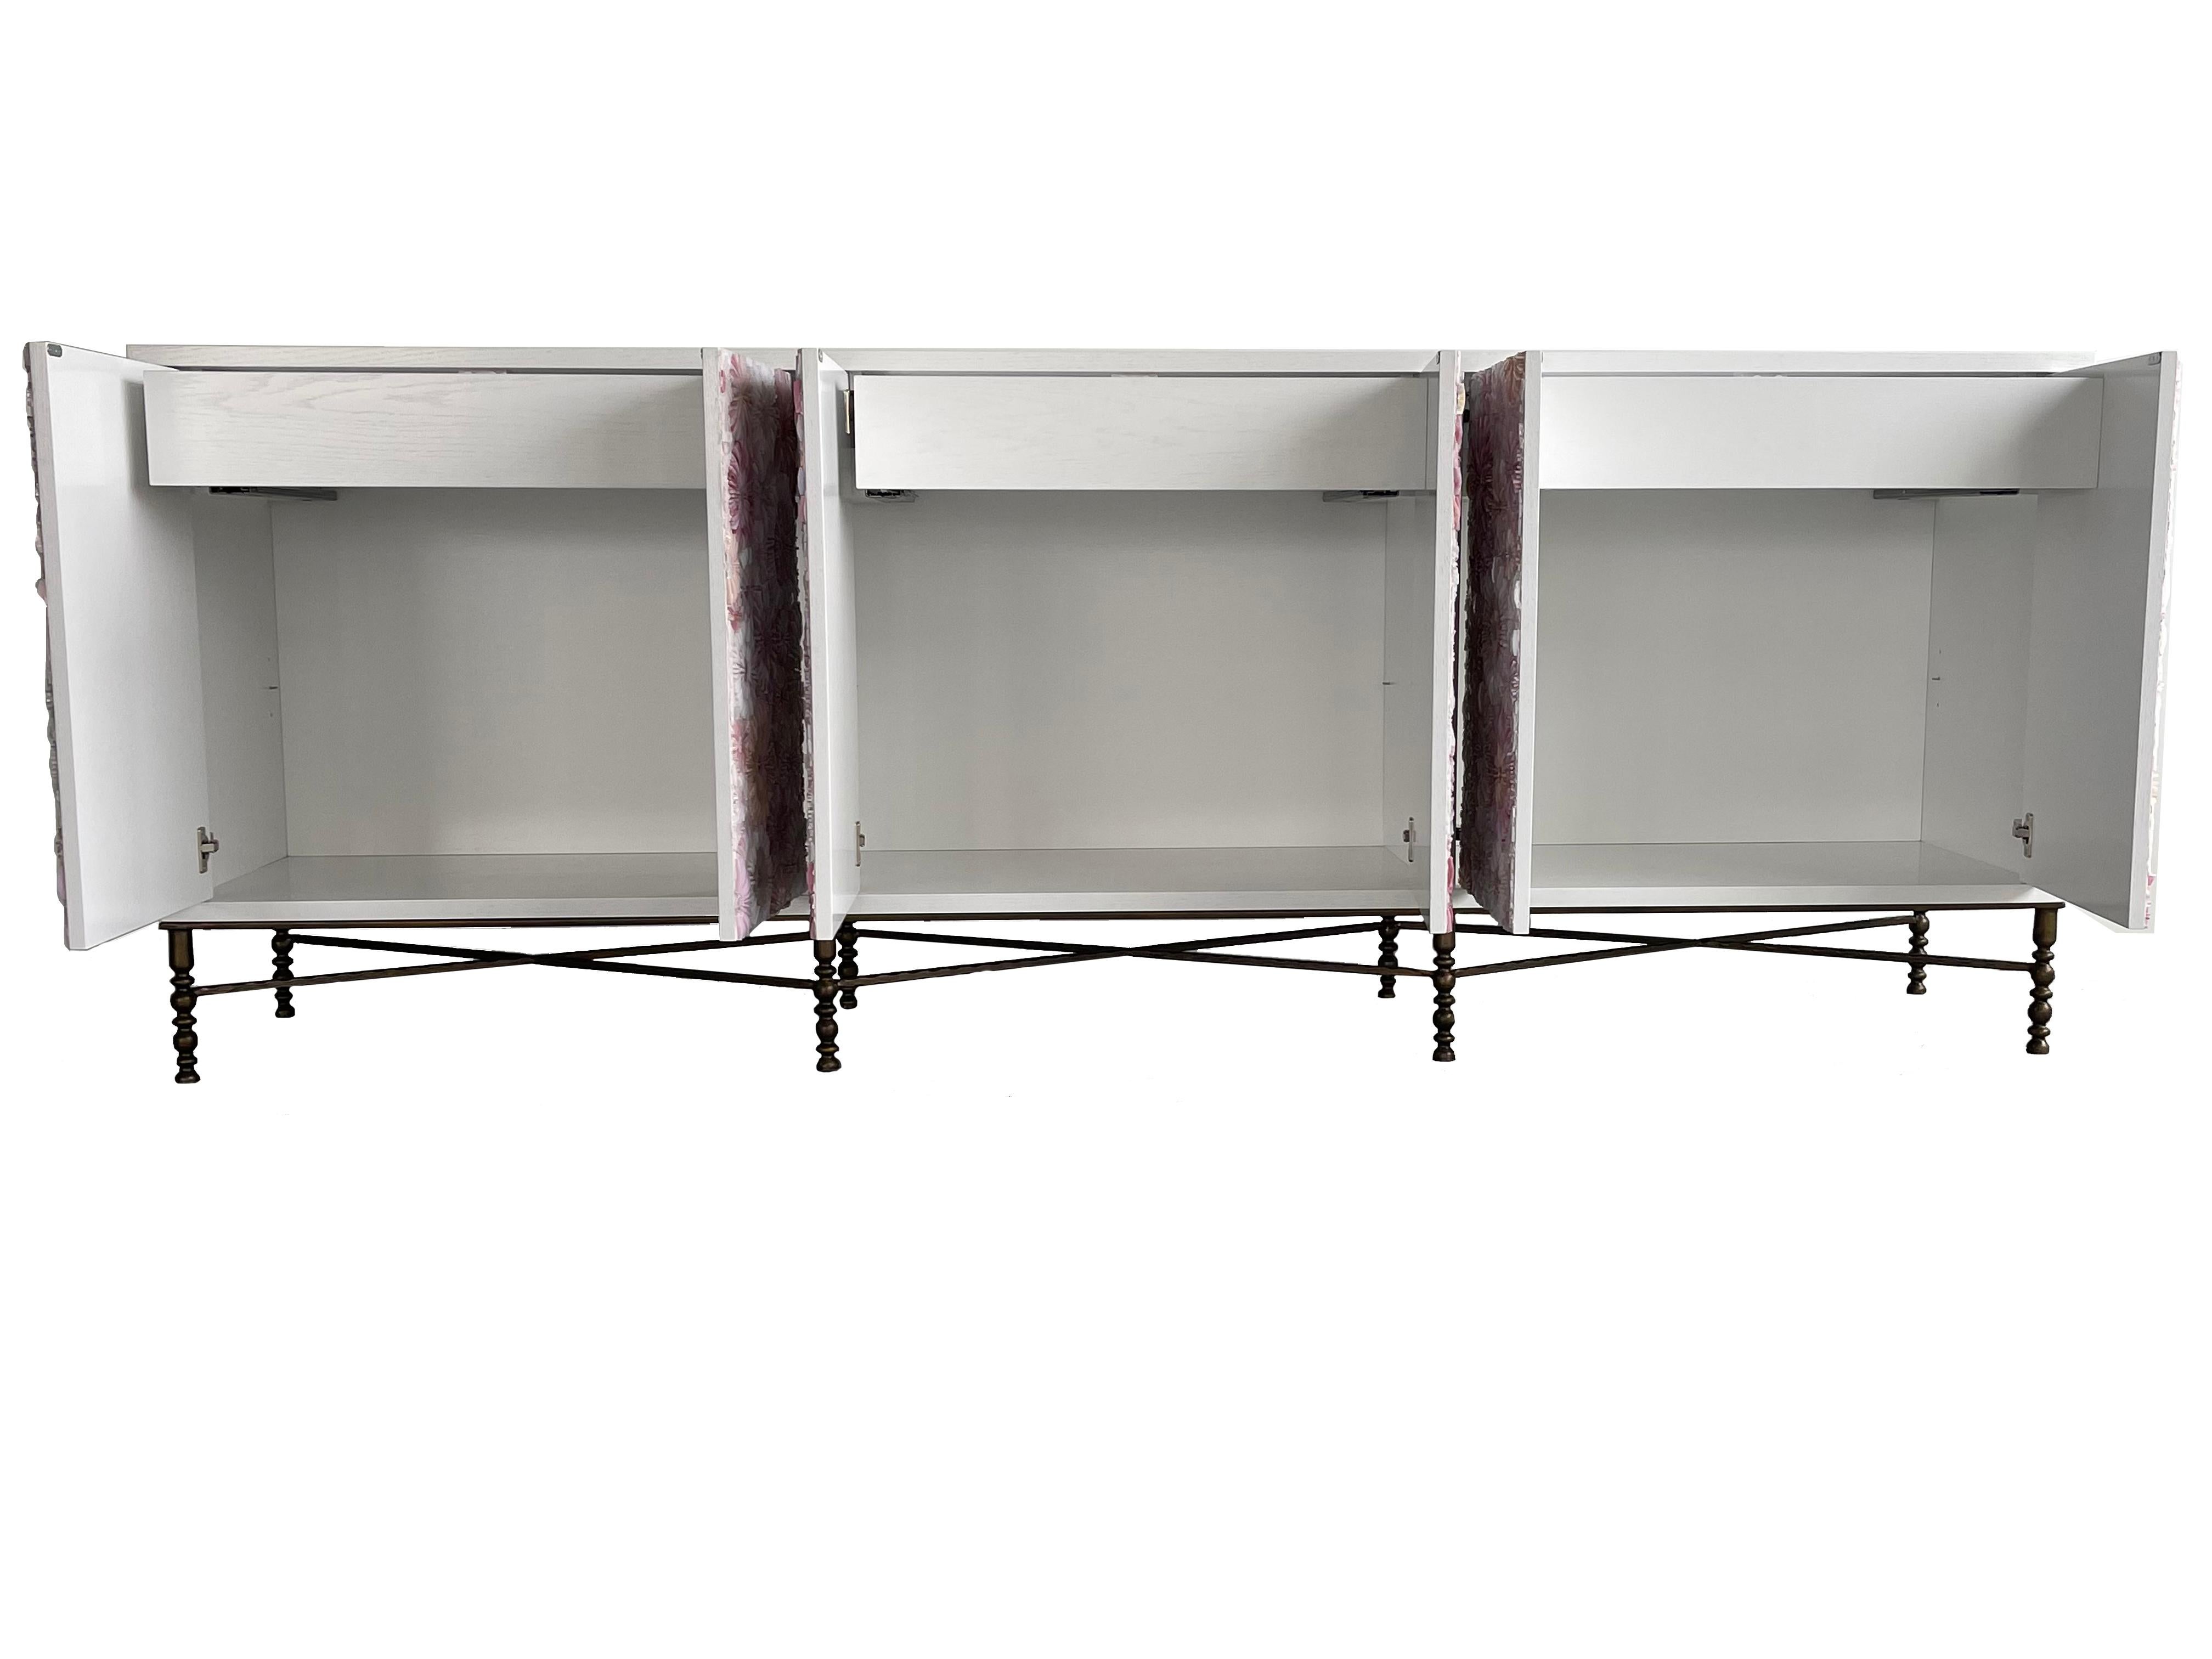 The blossom buffet by Ercole Home has a 6-door touch latch front, with painted white on oak wood finish.
This buffet contains three compartments each with one adjustable shelf and a drawer with built in self closing systems.
Hand cut glass mosaic